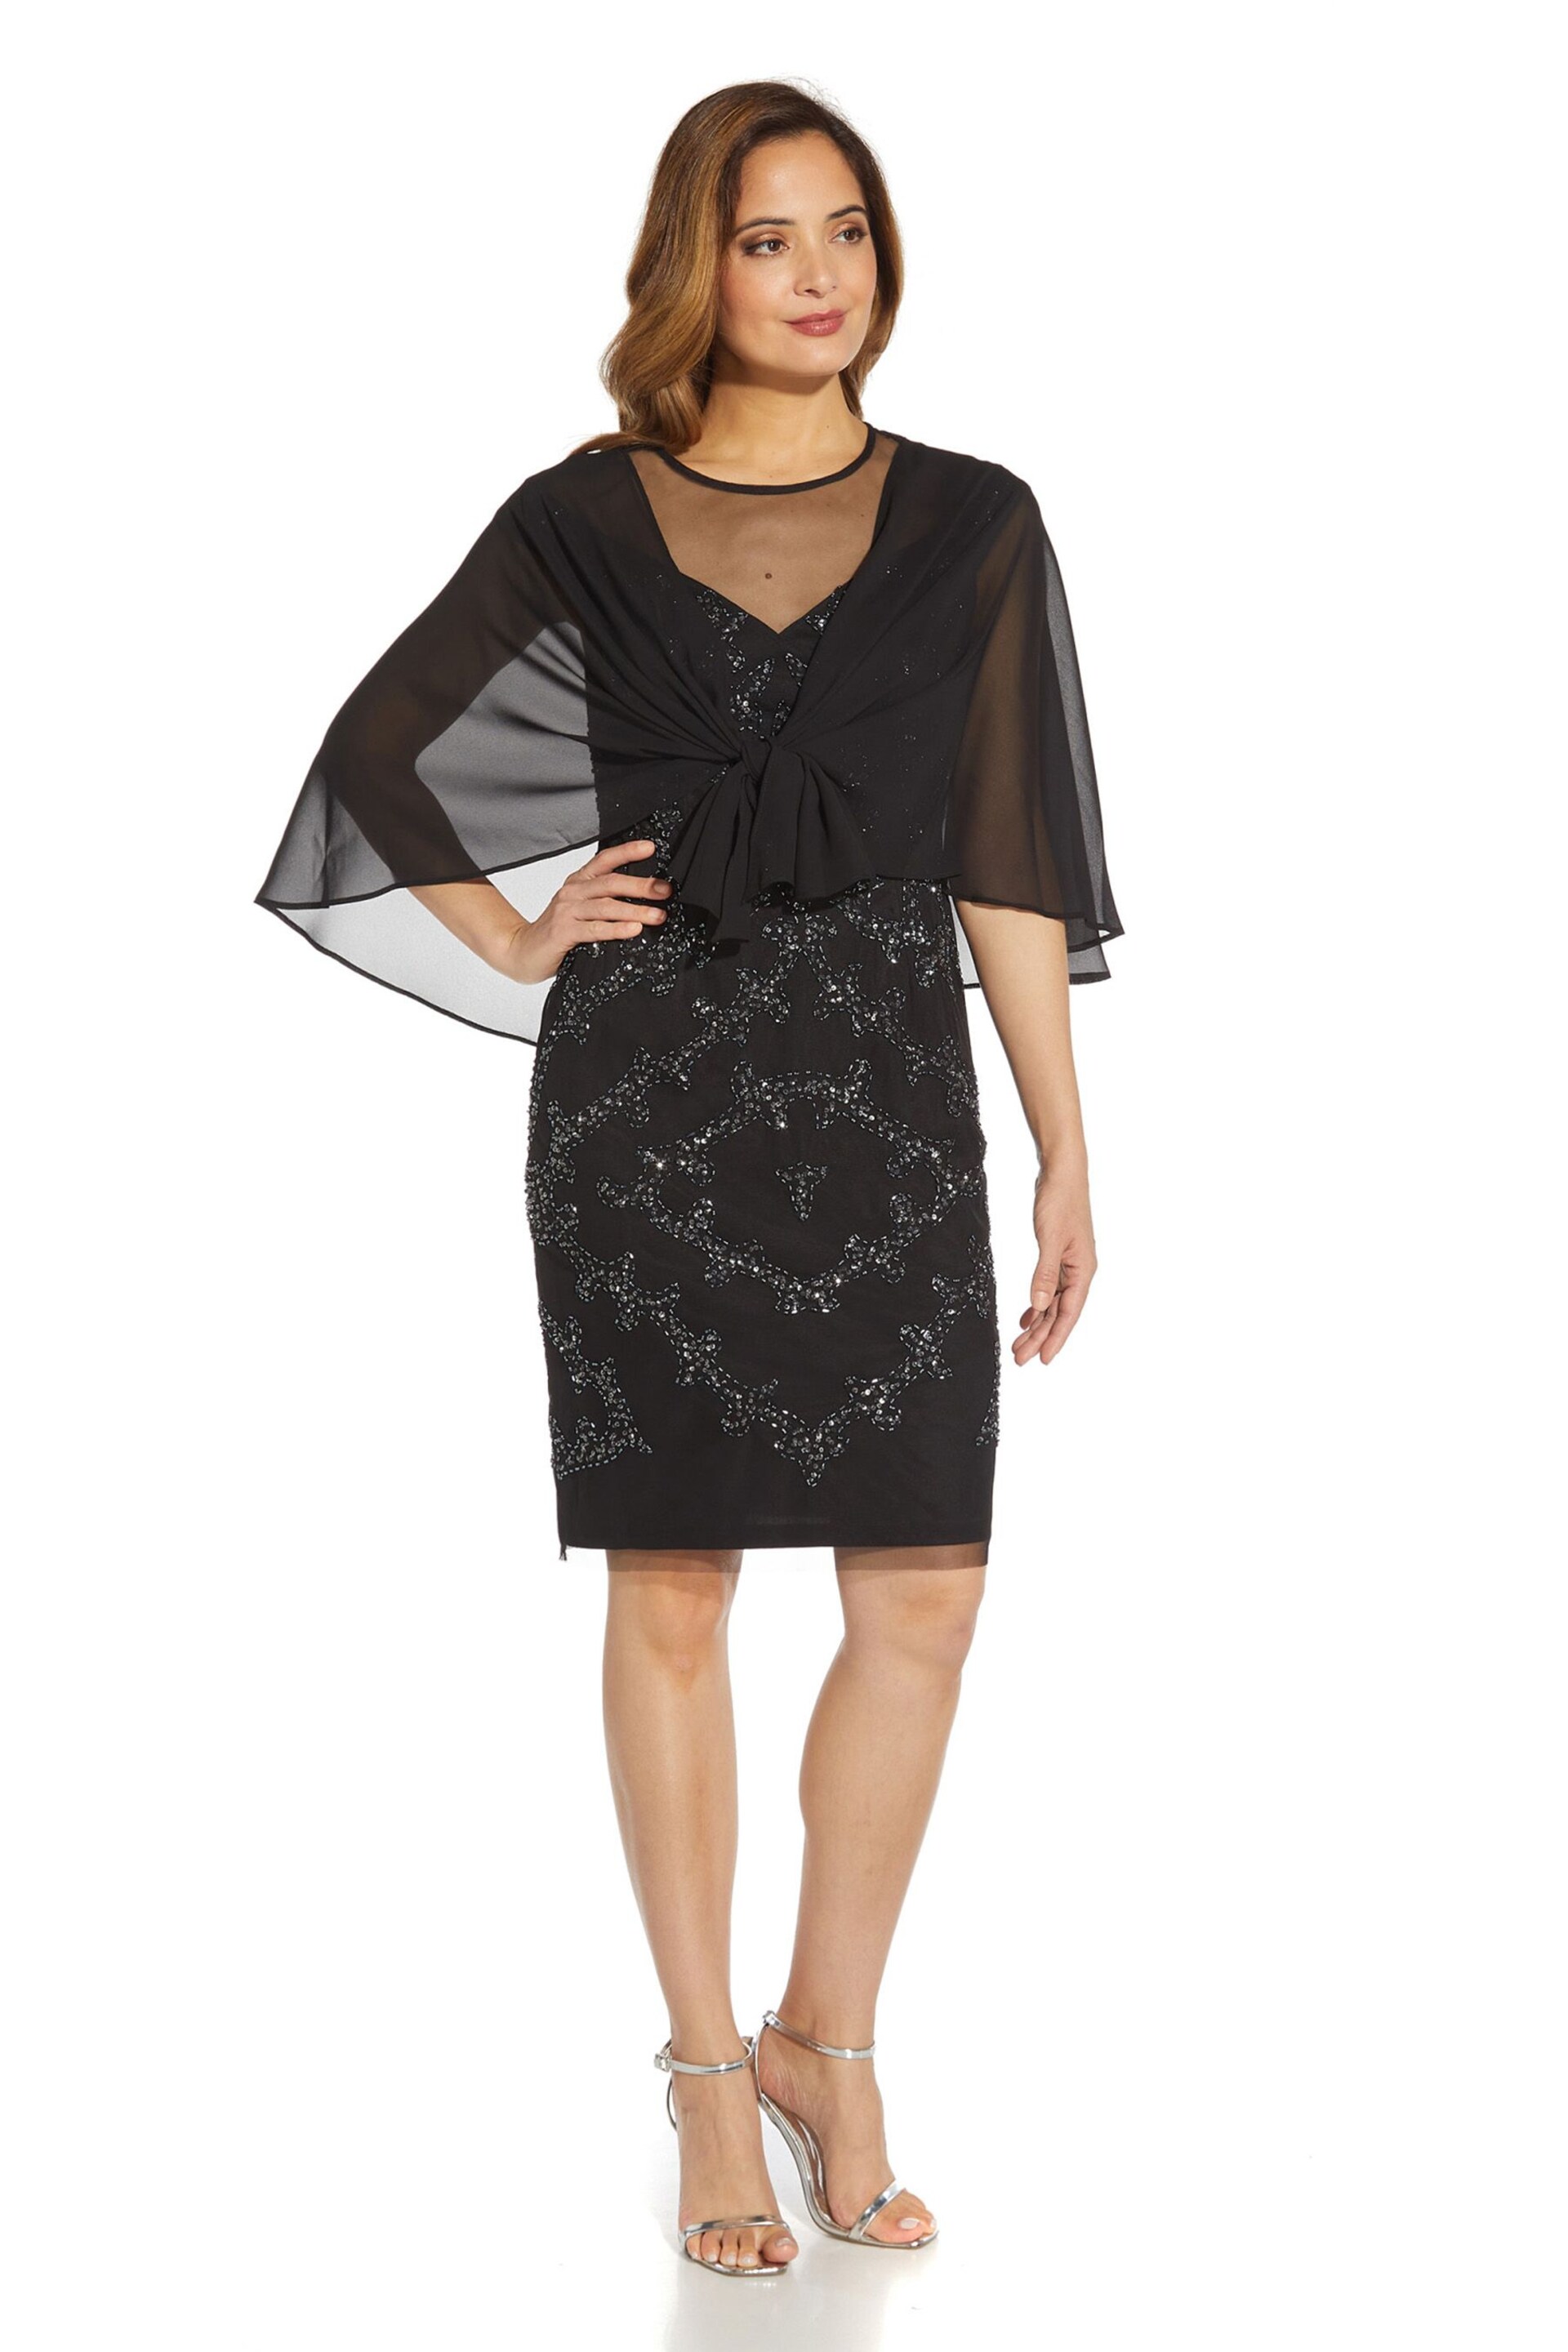 Adrianna Papell Black Chiffon Cover-Up - Image 2 of 4